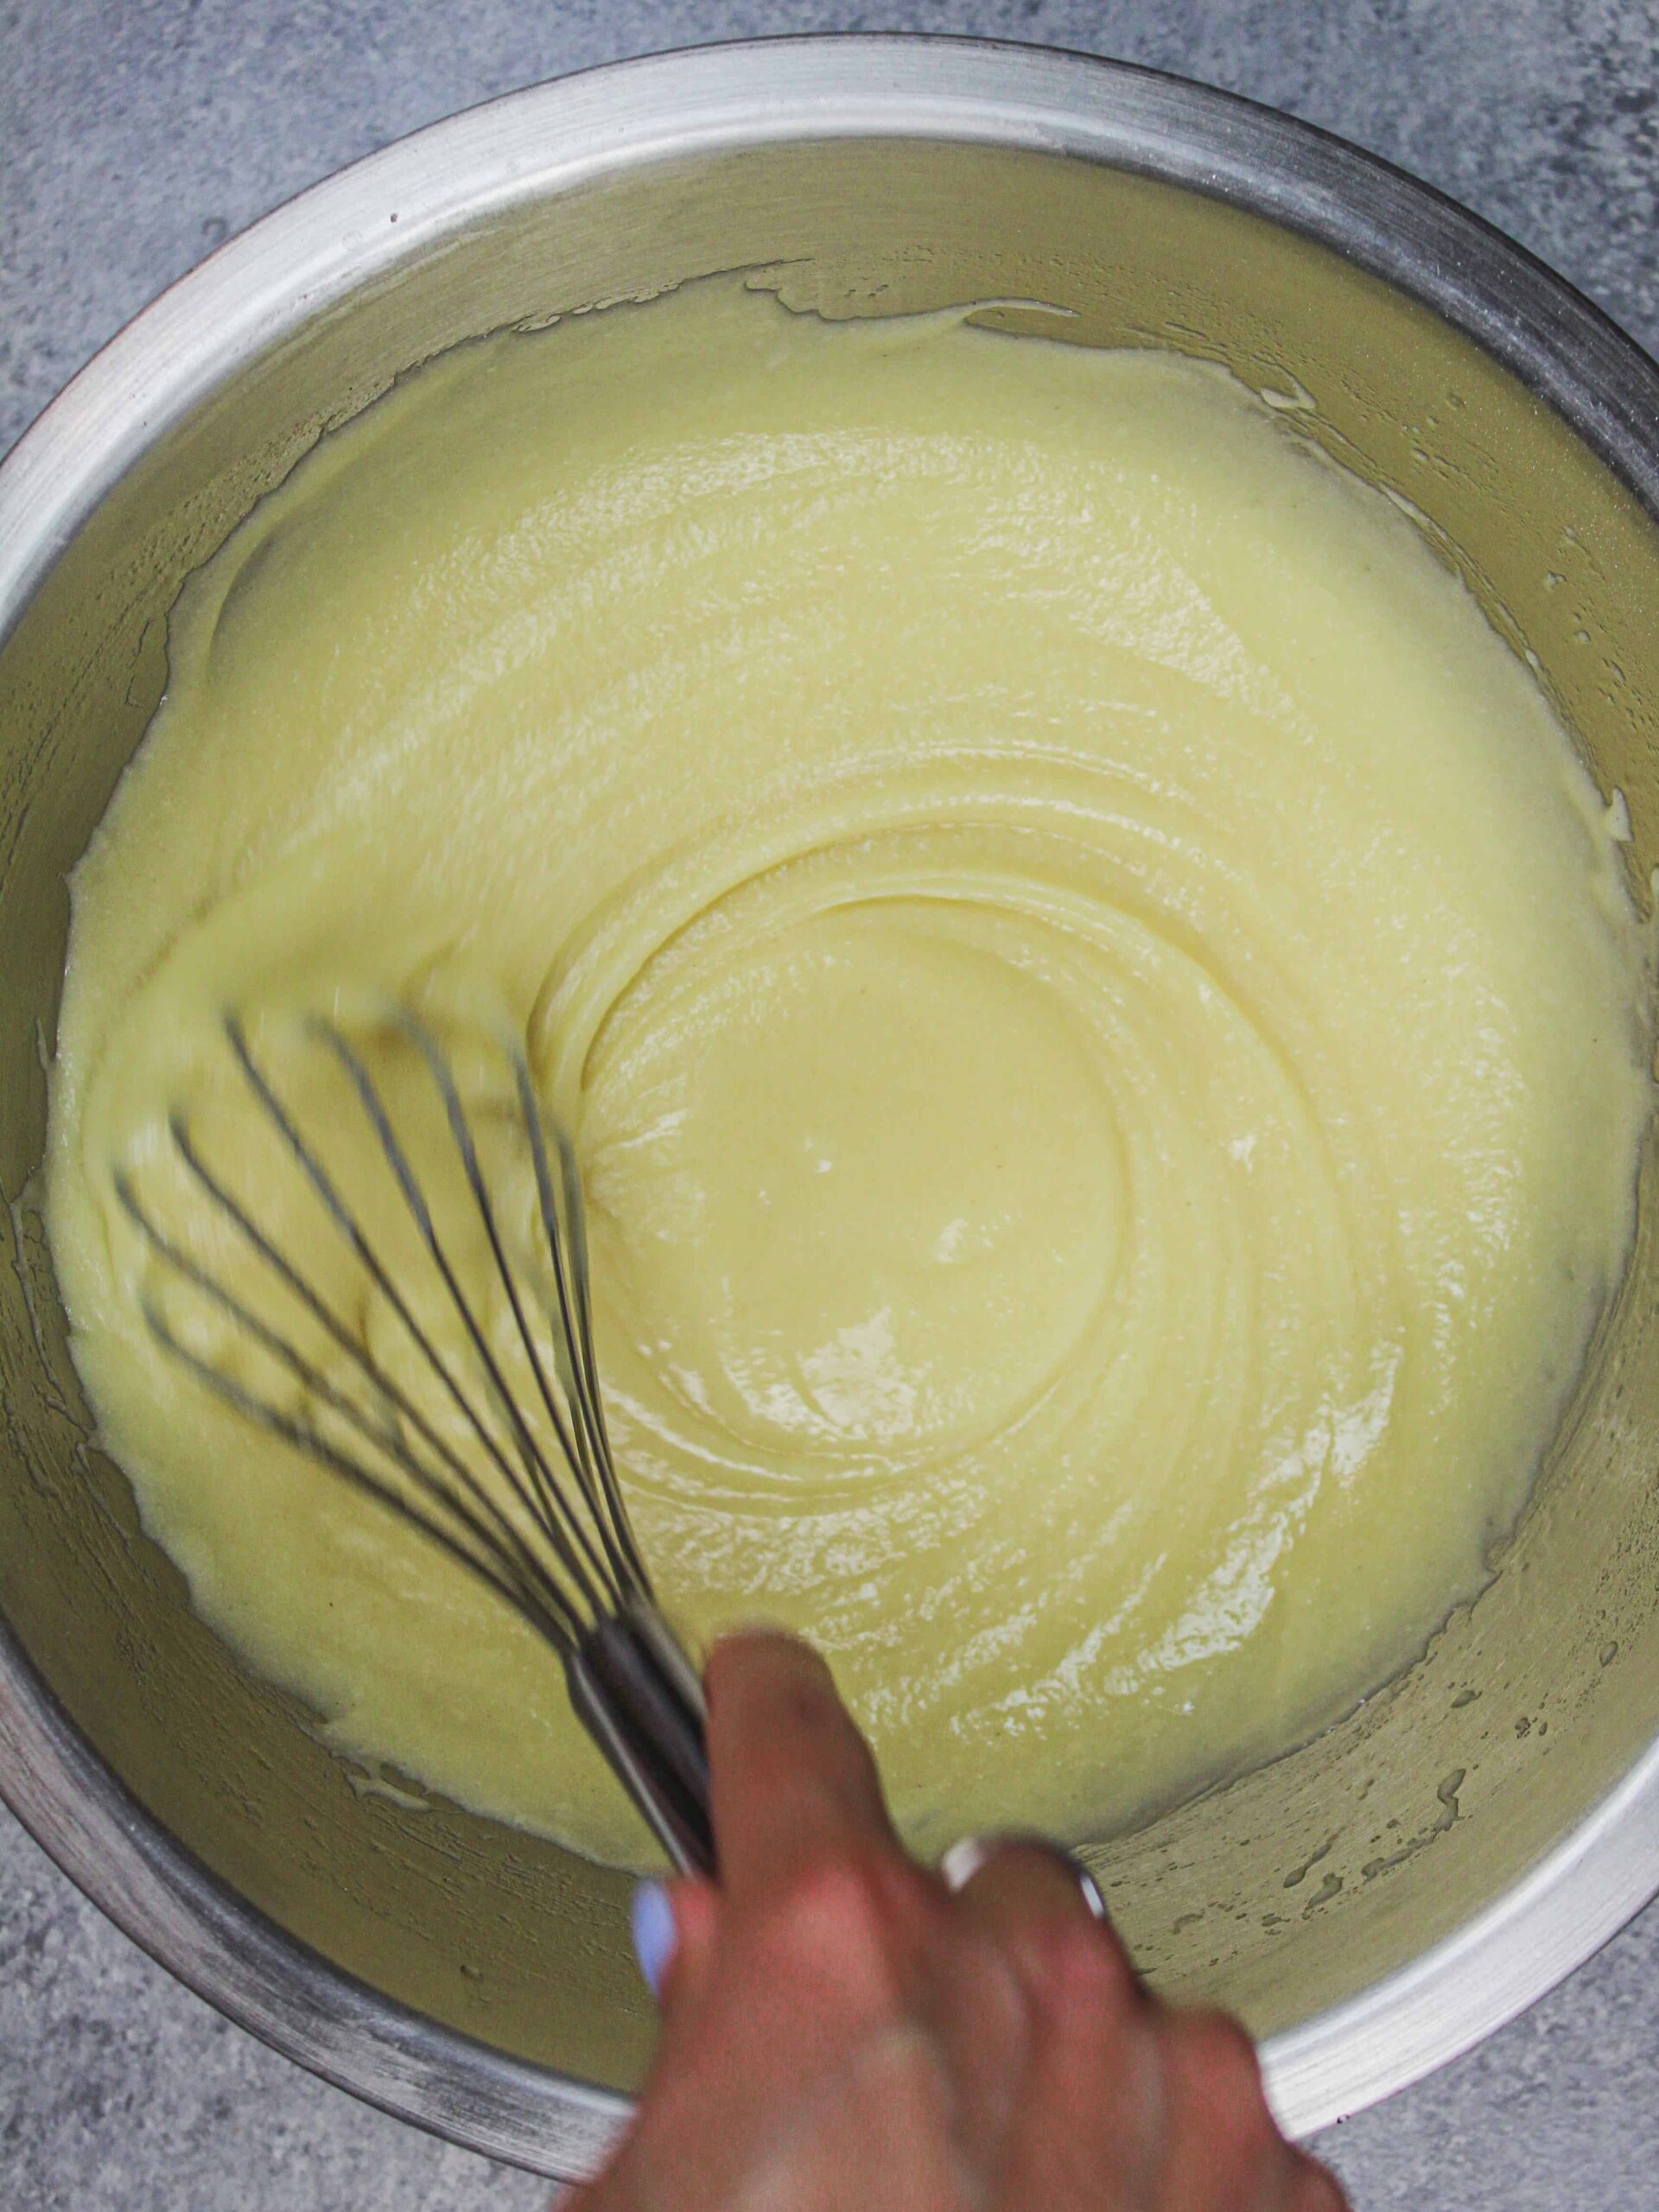 image of gluten free cake batter being overstirred to help give it the structure it needs